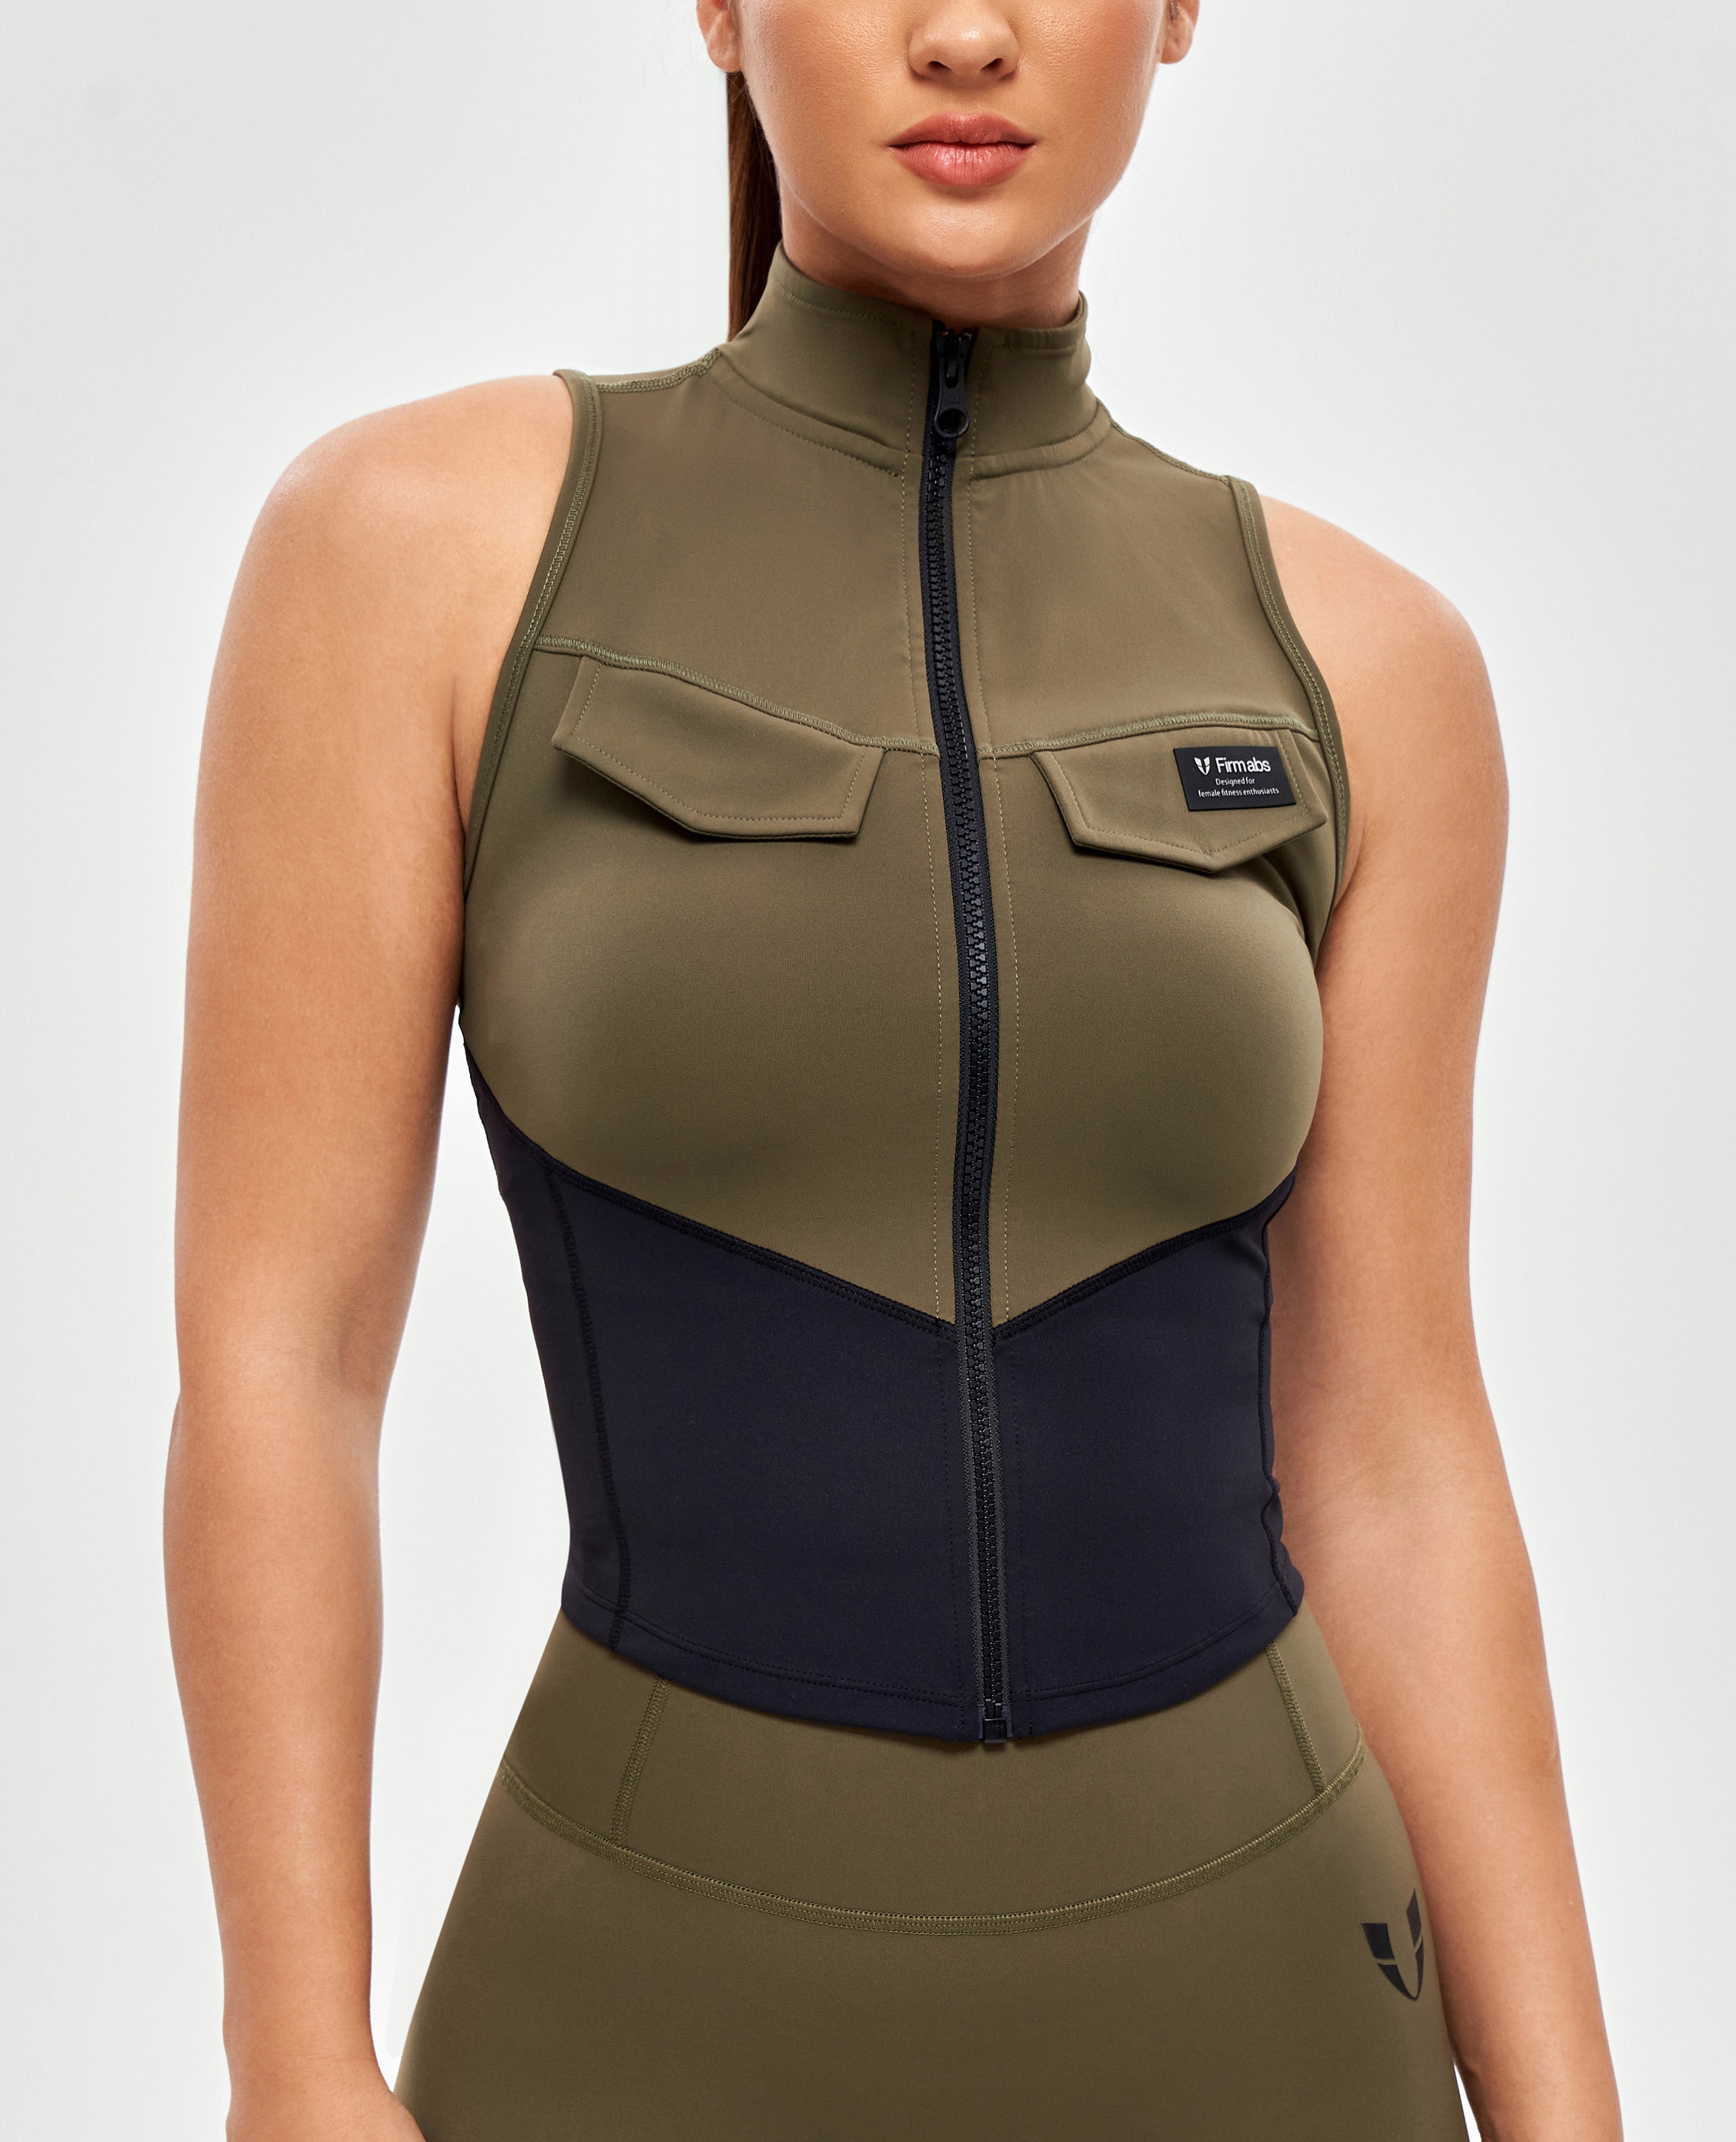 Army Abs Tank - Combat Green and Black